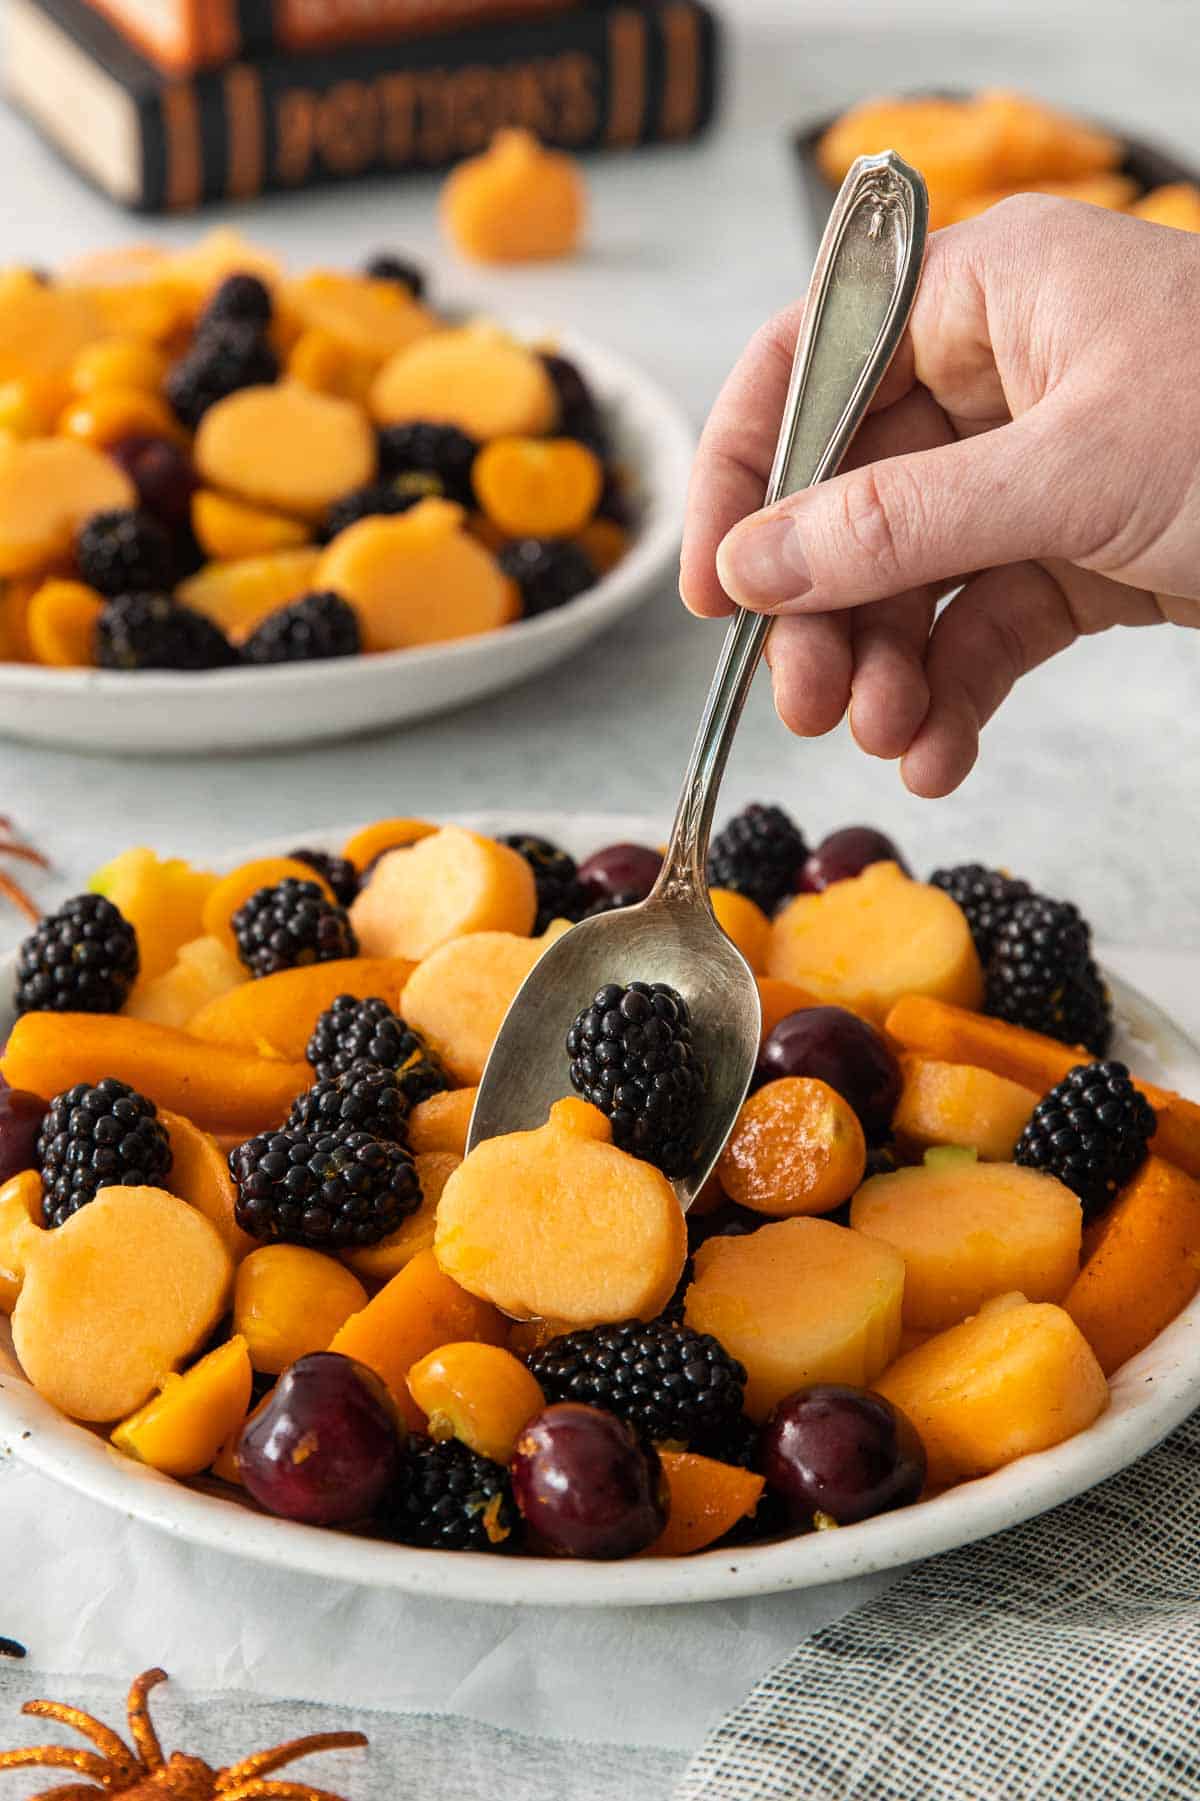 A hand holding a serving spoon to scoop into the bowl of Halloween fruit salad